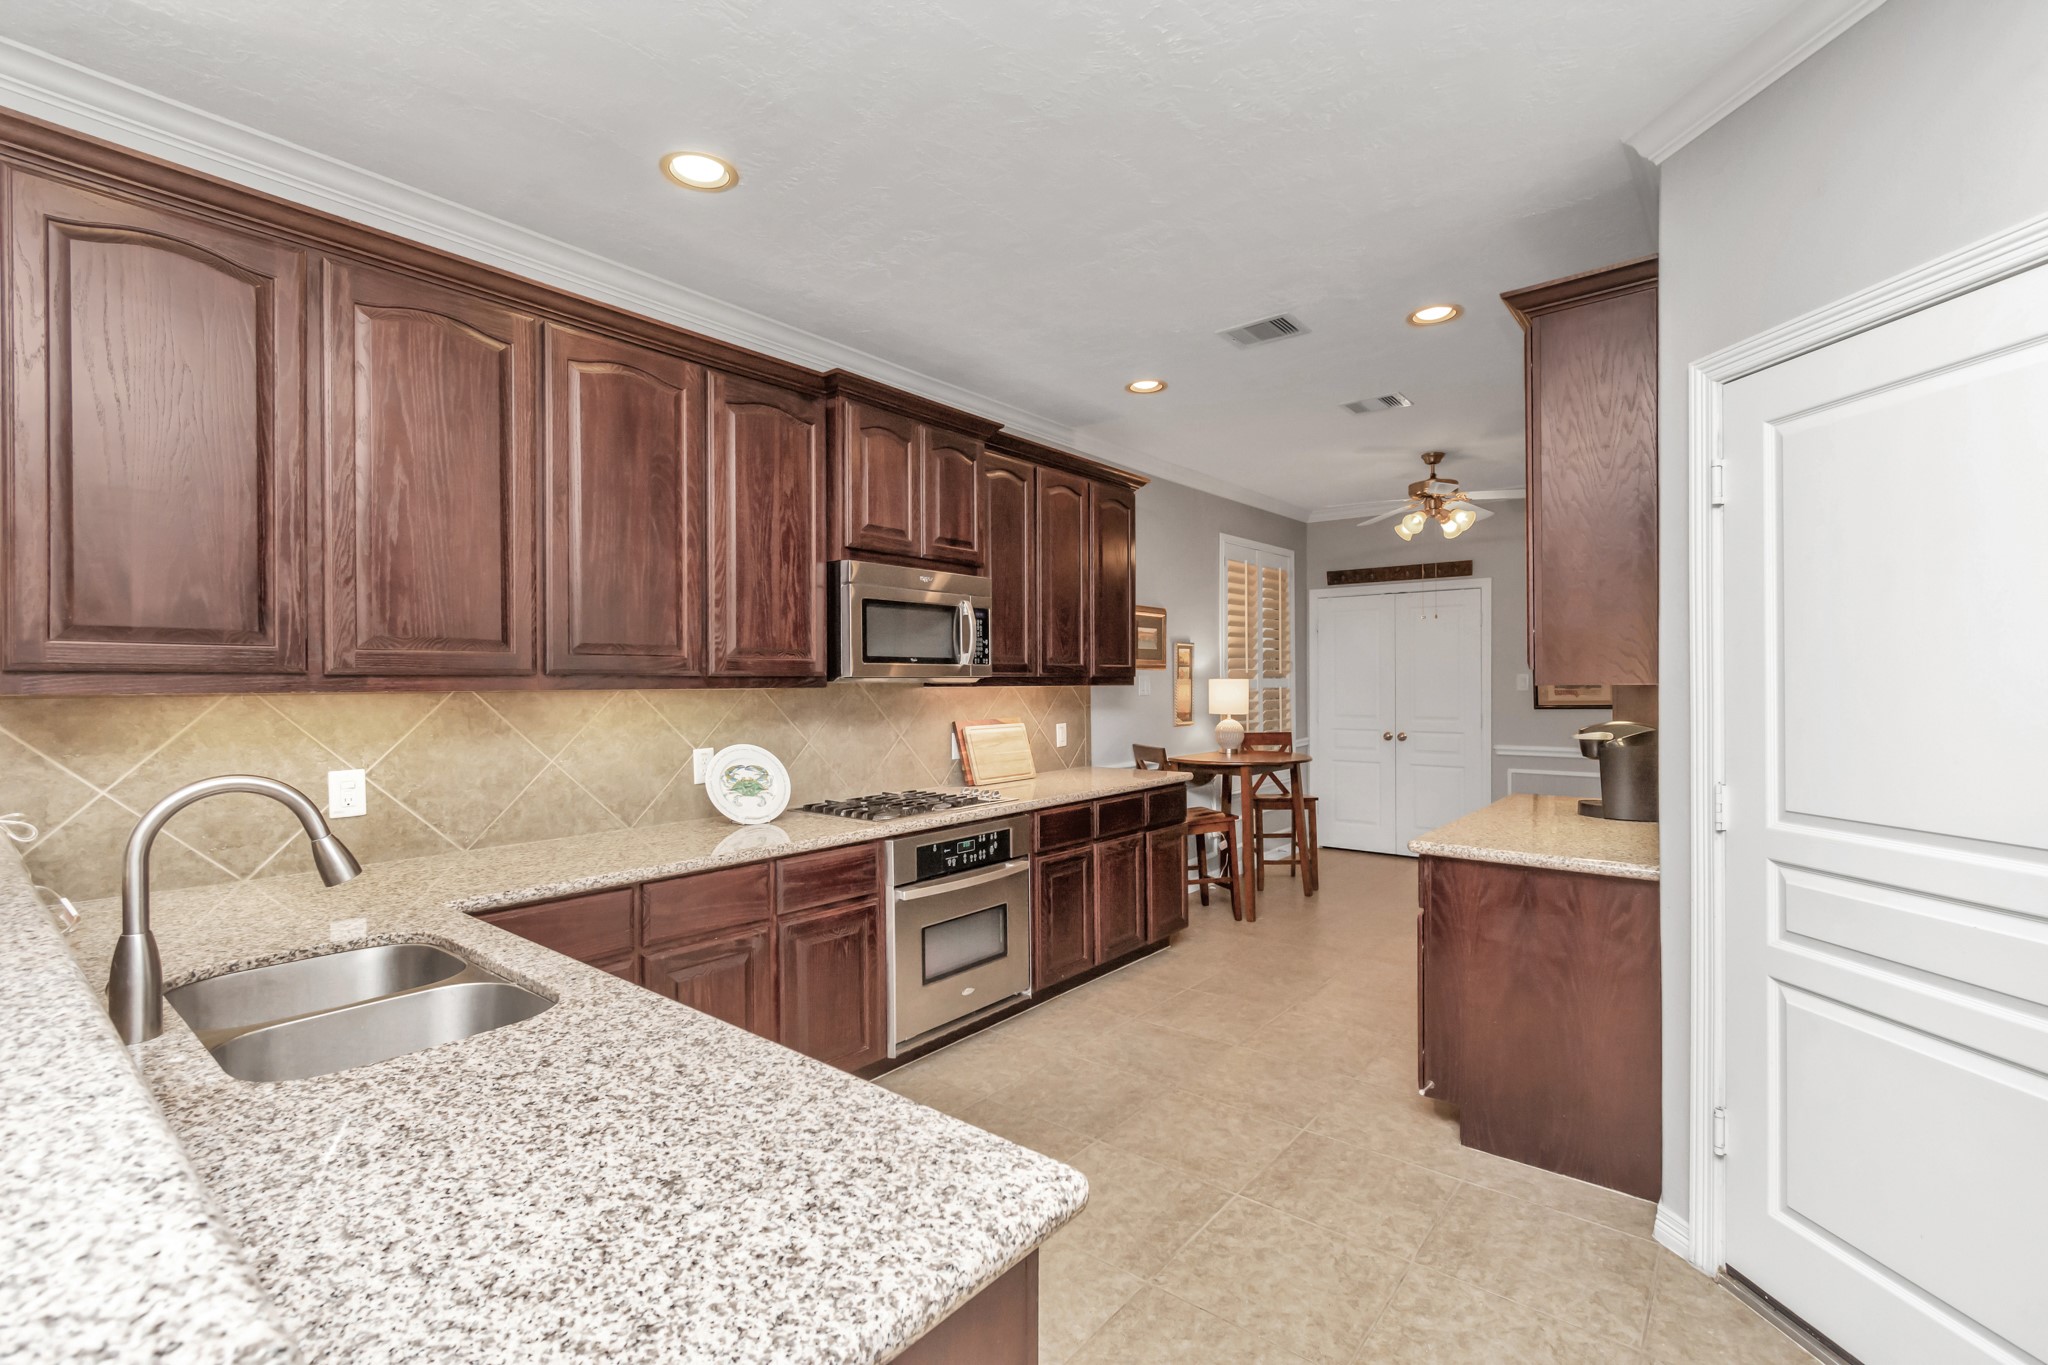 This kitchen is complete with abundant cabinetry for all your storage needs.